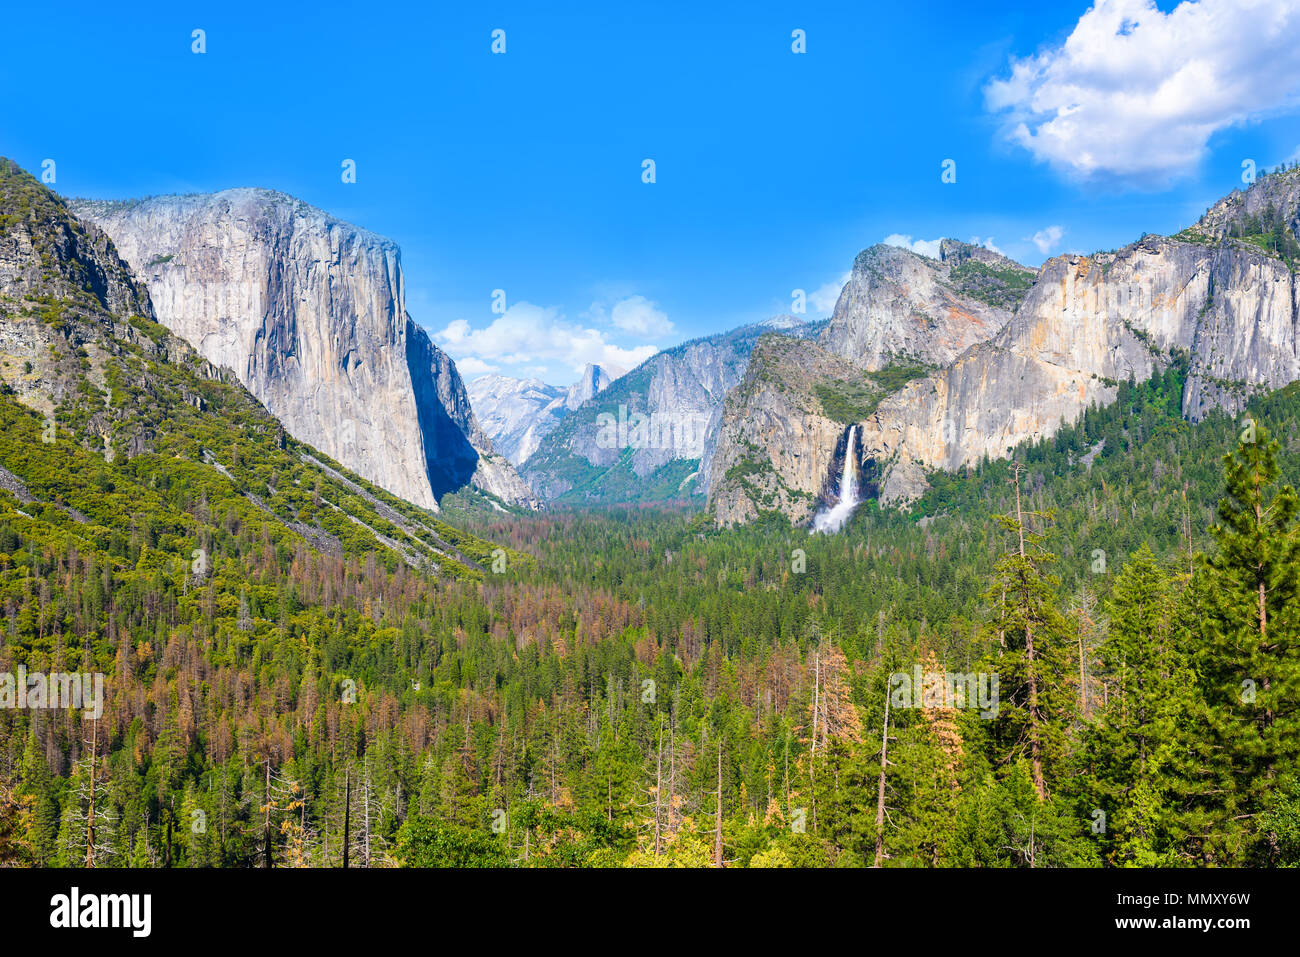 View of Yosemite Valley from Tunnel View point - view to Bridal veil falls, El Capitan and Half Dome - Yosemite National Park in California, USA Stock Photo